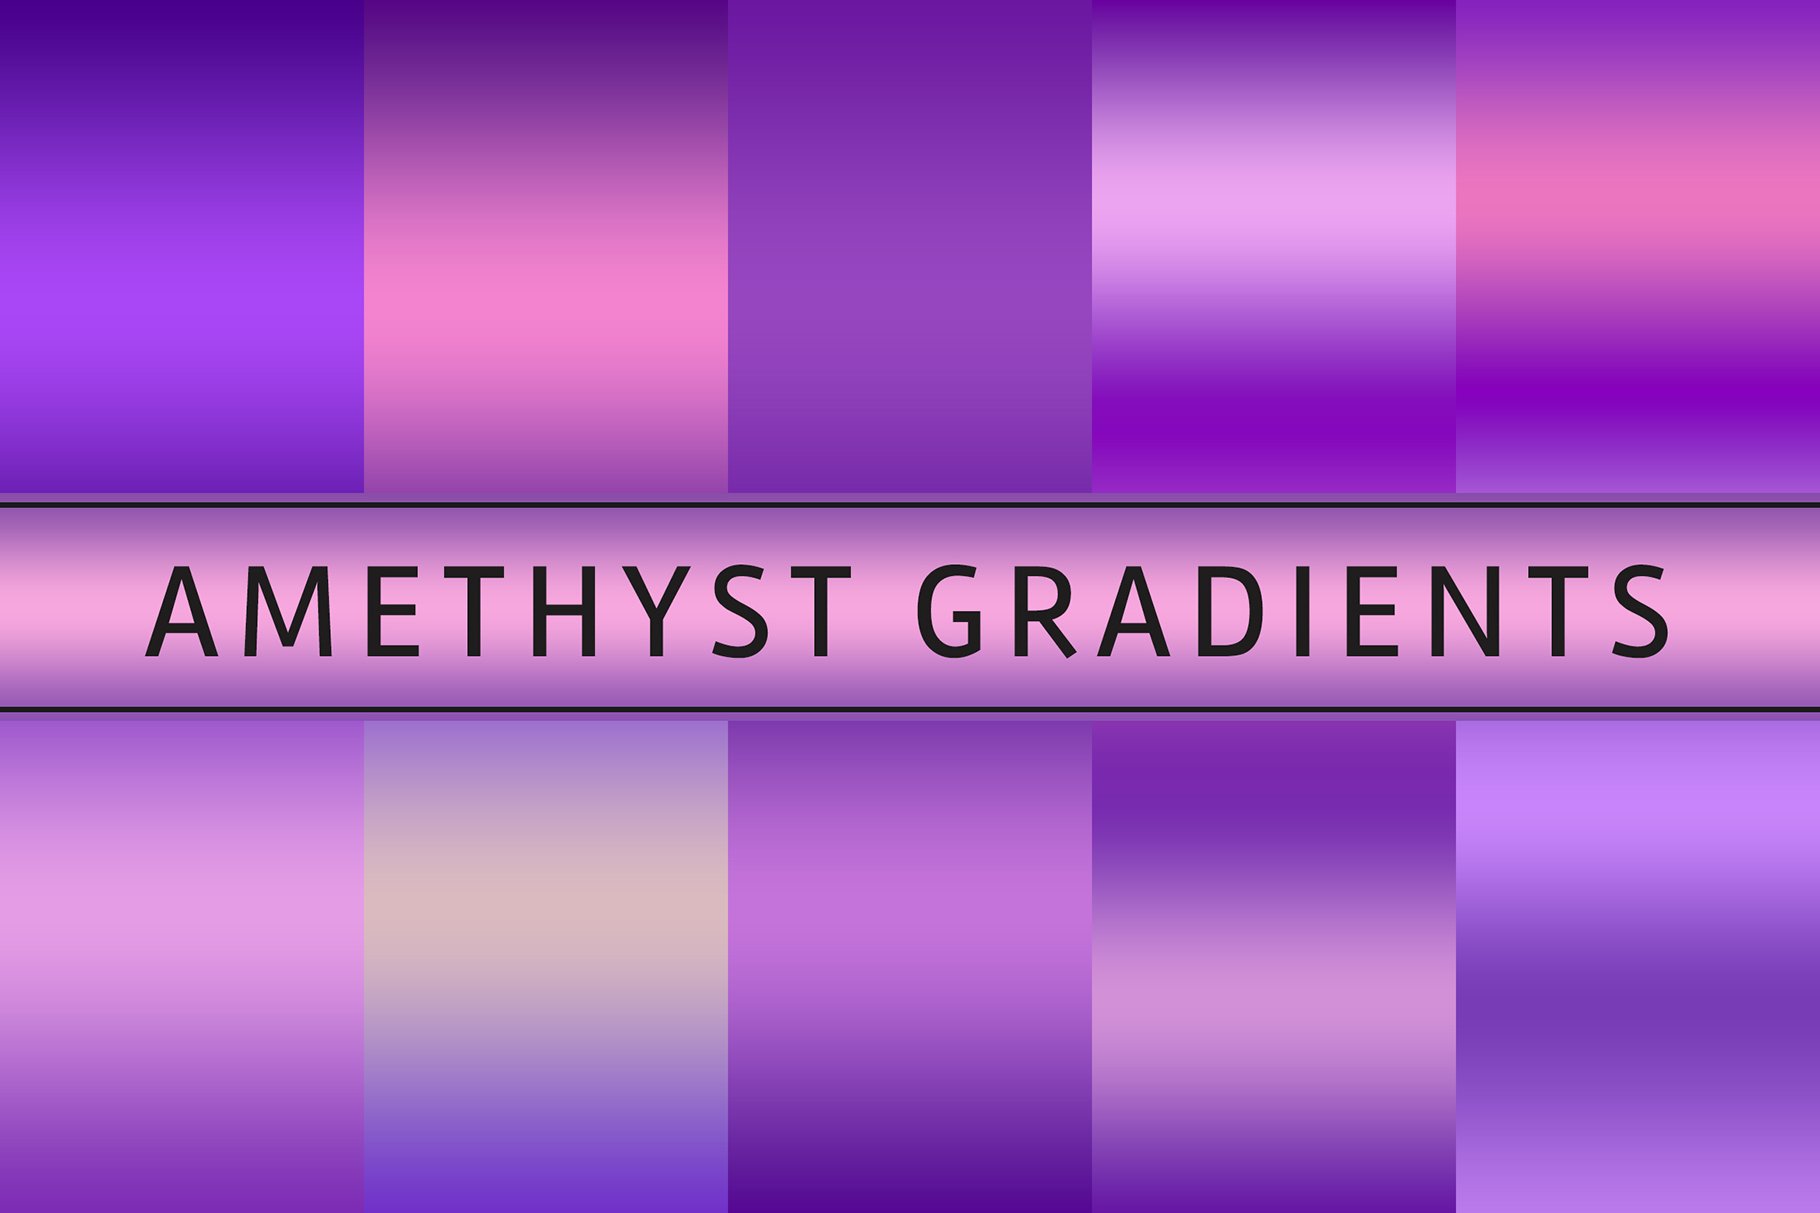 Amethyst Gradientscover image.